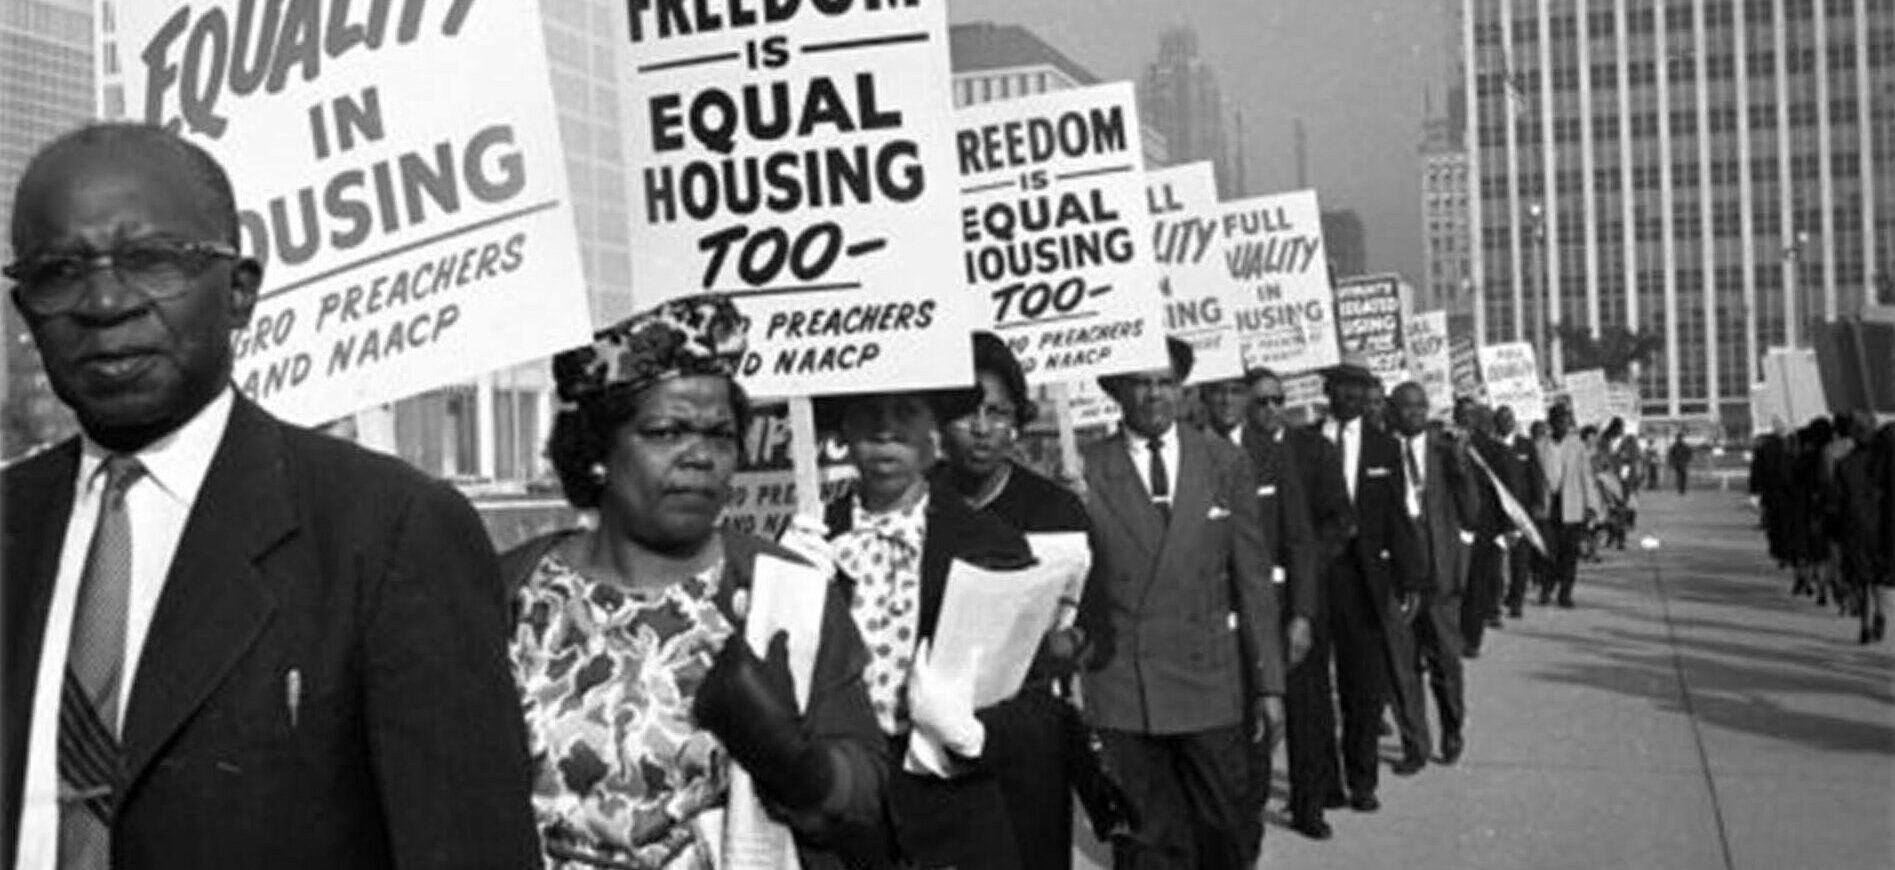 Historic photo of protesters advocating for equal housing